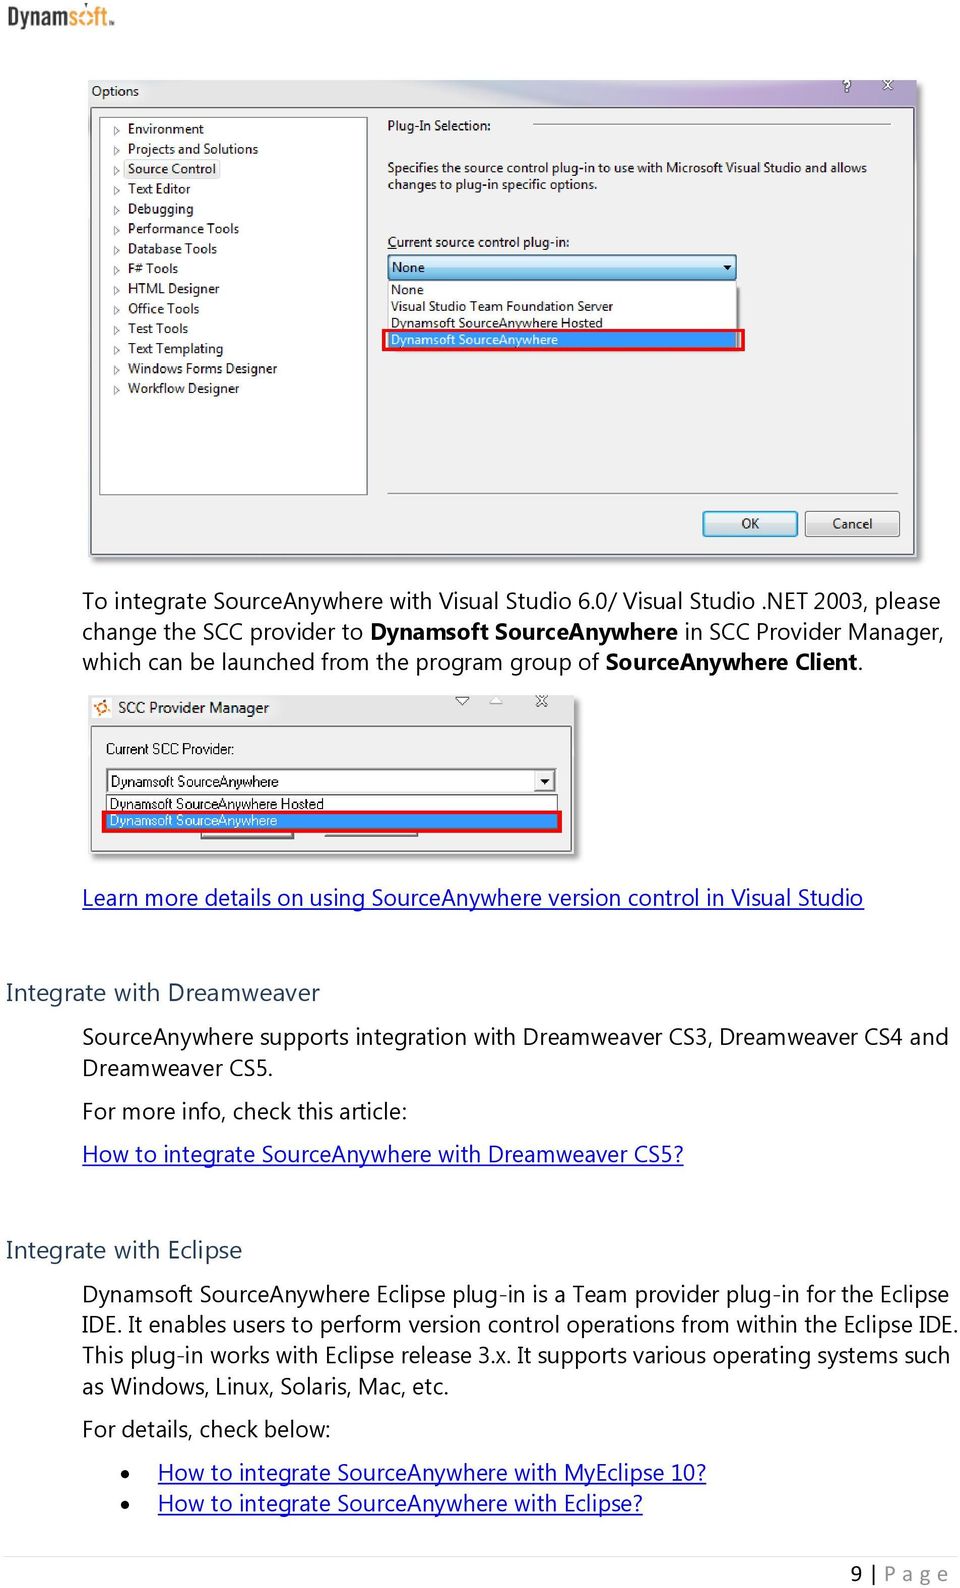 Learn more details on using SourceAnywhere version control in Visual Studio Integrate with Dreamweaver SourceAnywhere supports integration with Dreamweaver CS3, Dreamweaver CS4 and Dreamweaver CS5.